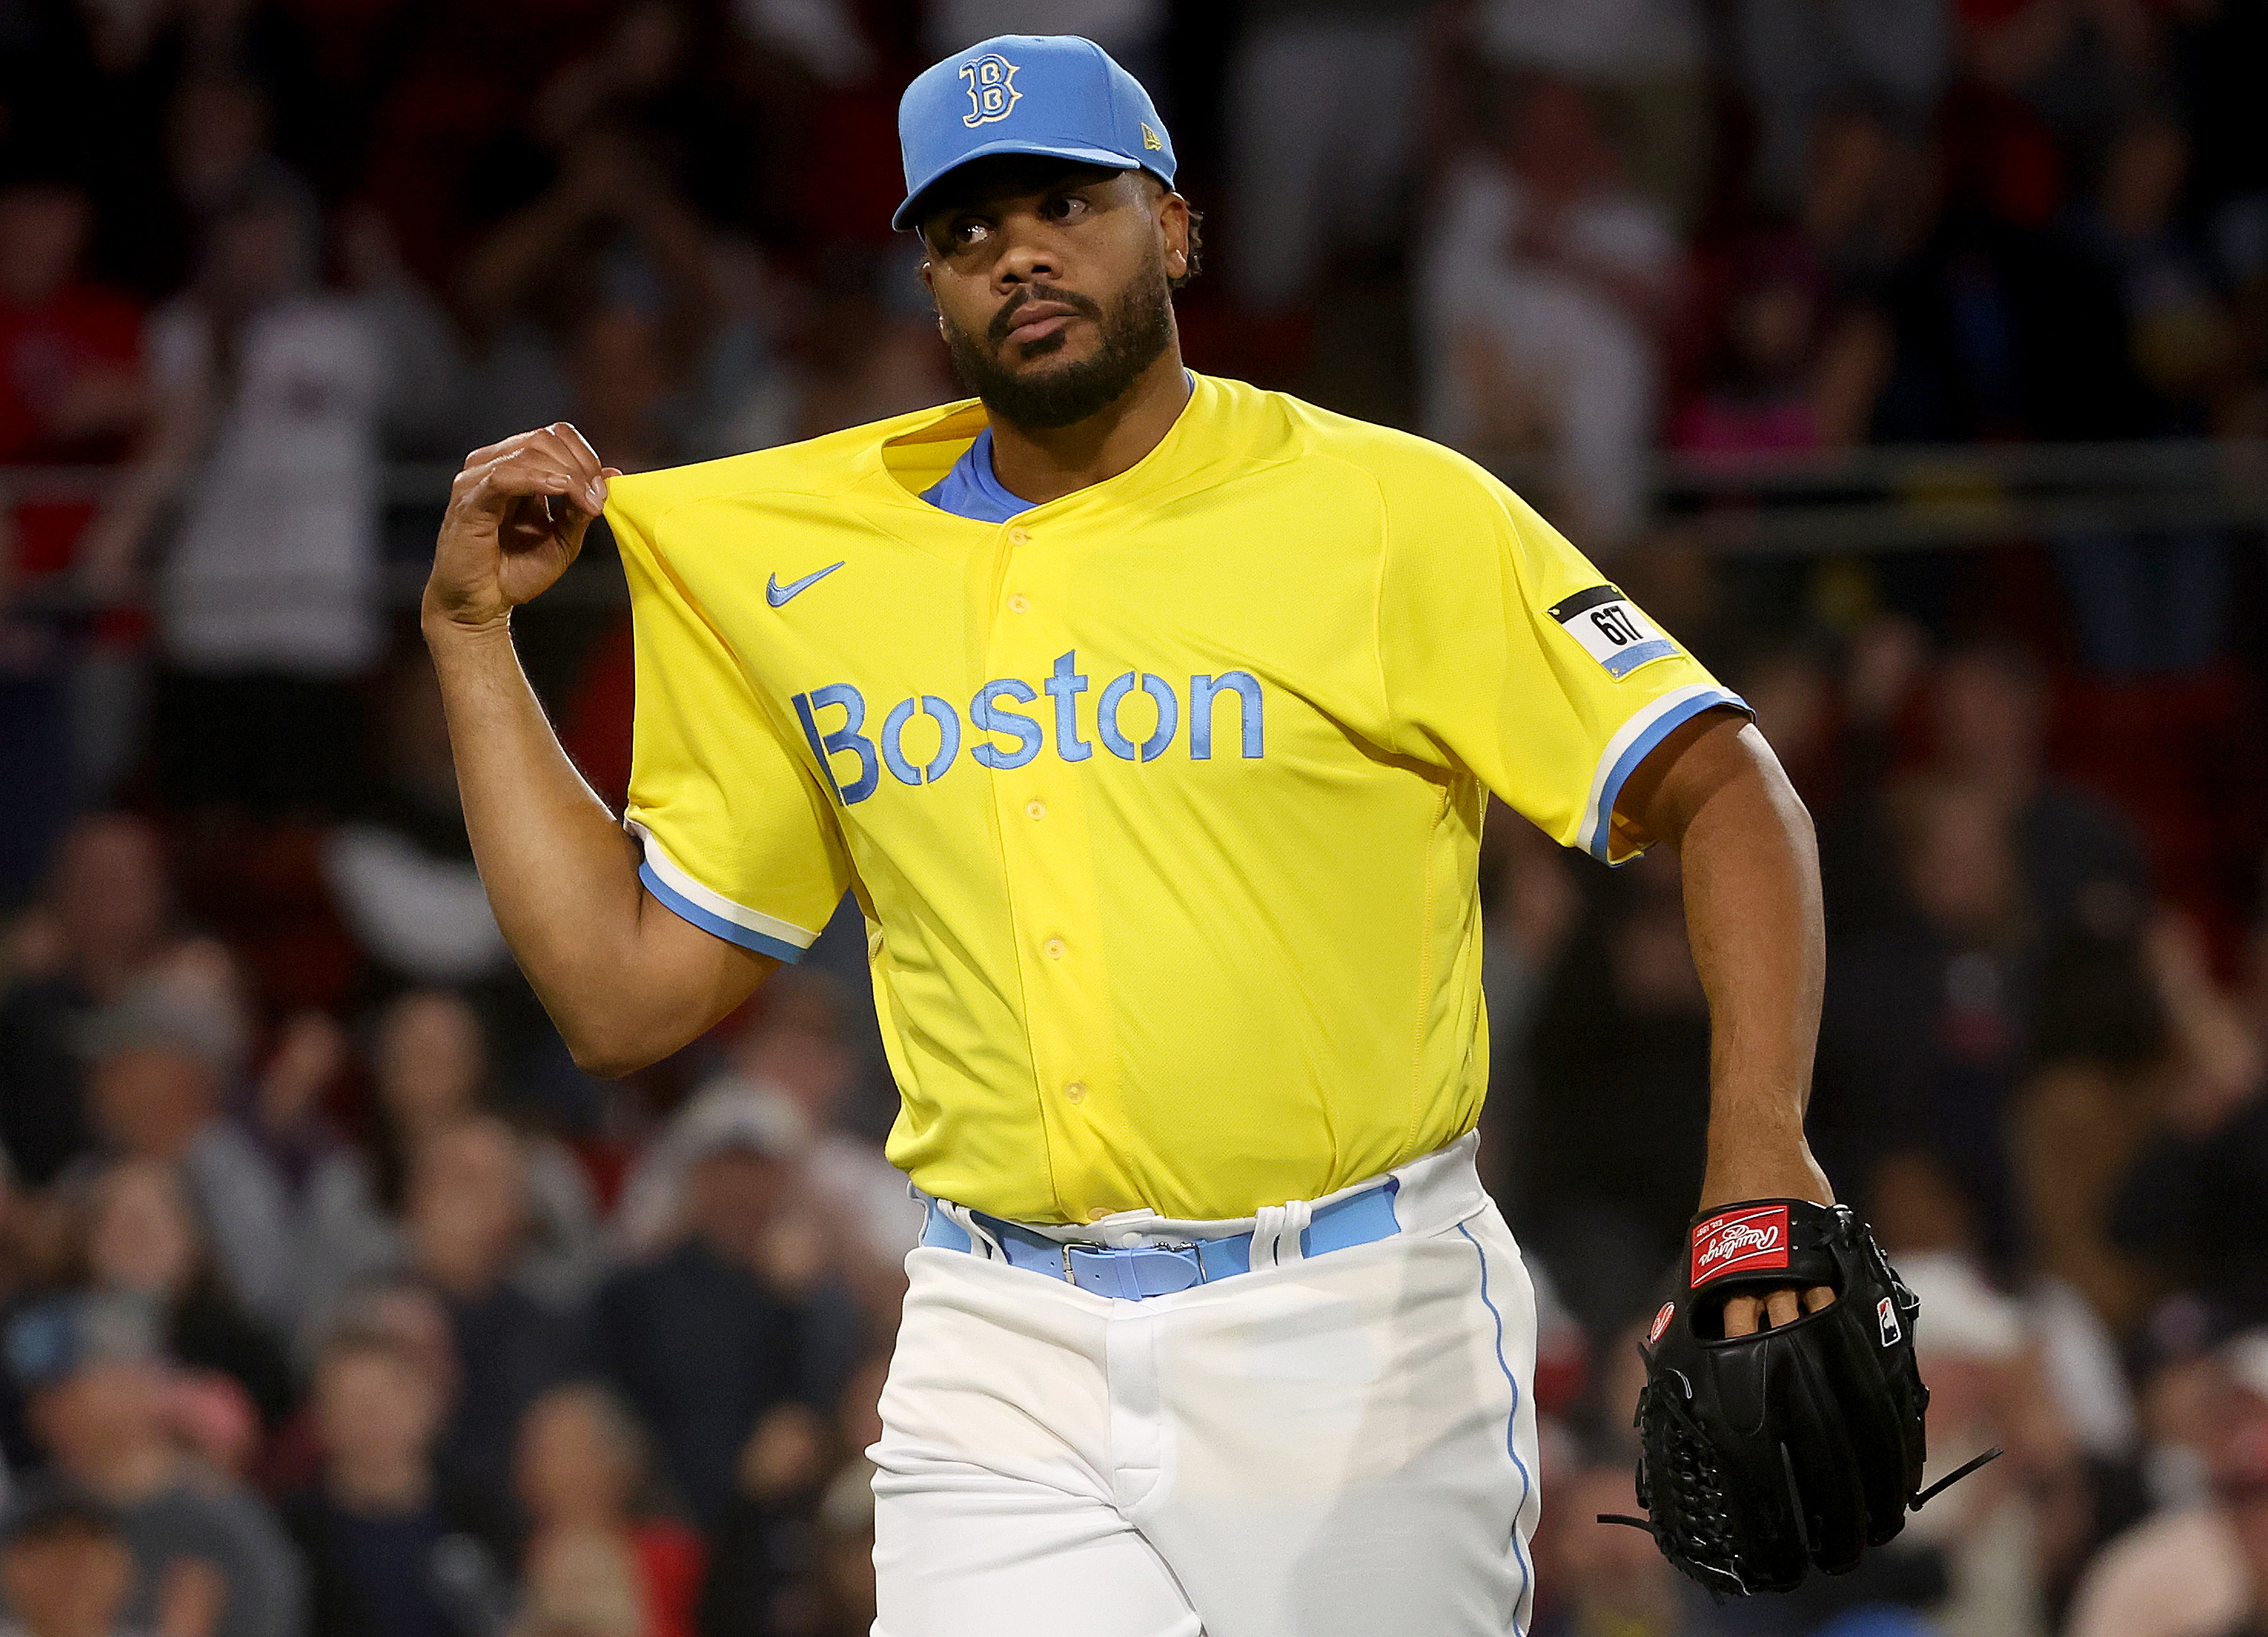 After a Decade as the Dodgers' Closer, Kenley Jansen Joins the Braves